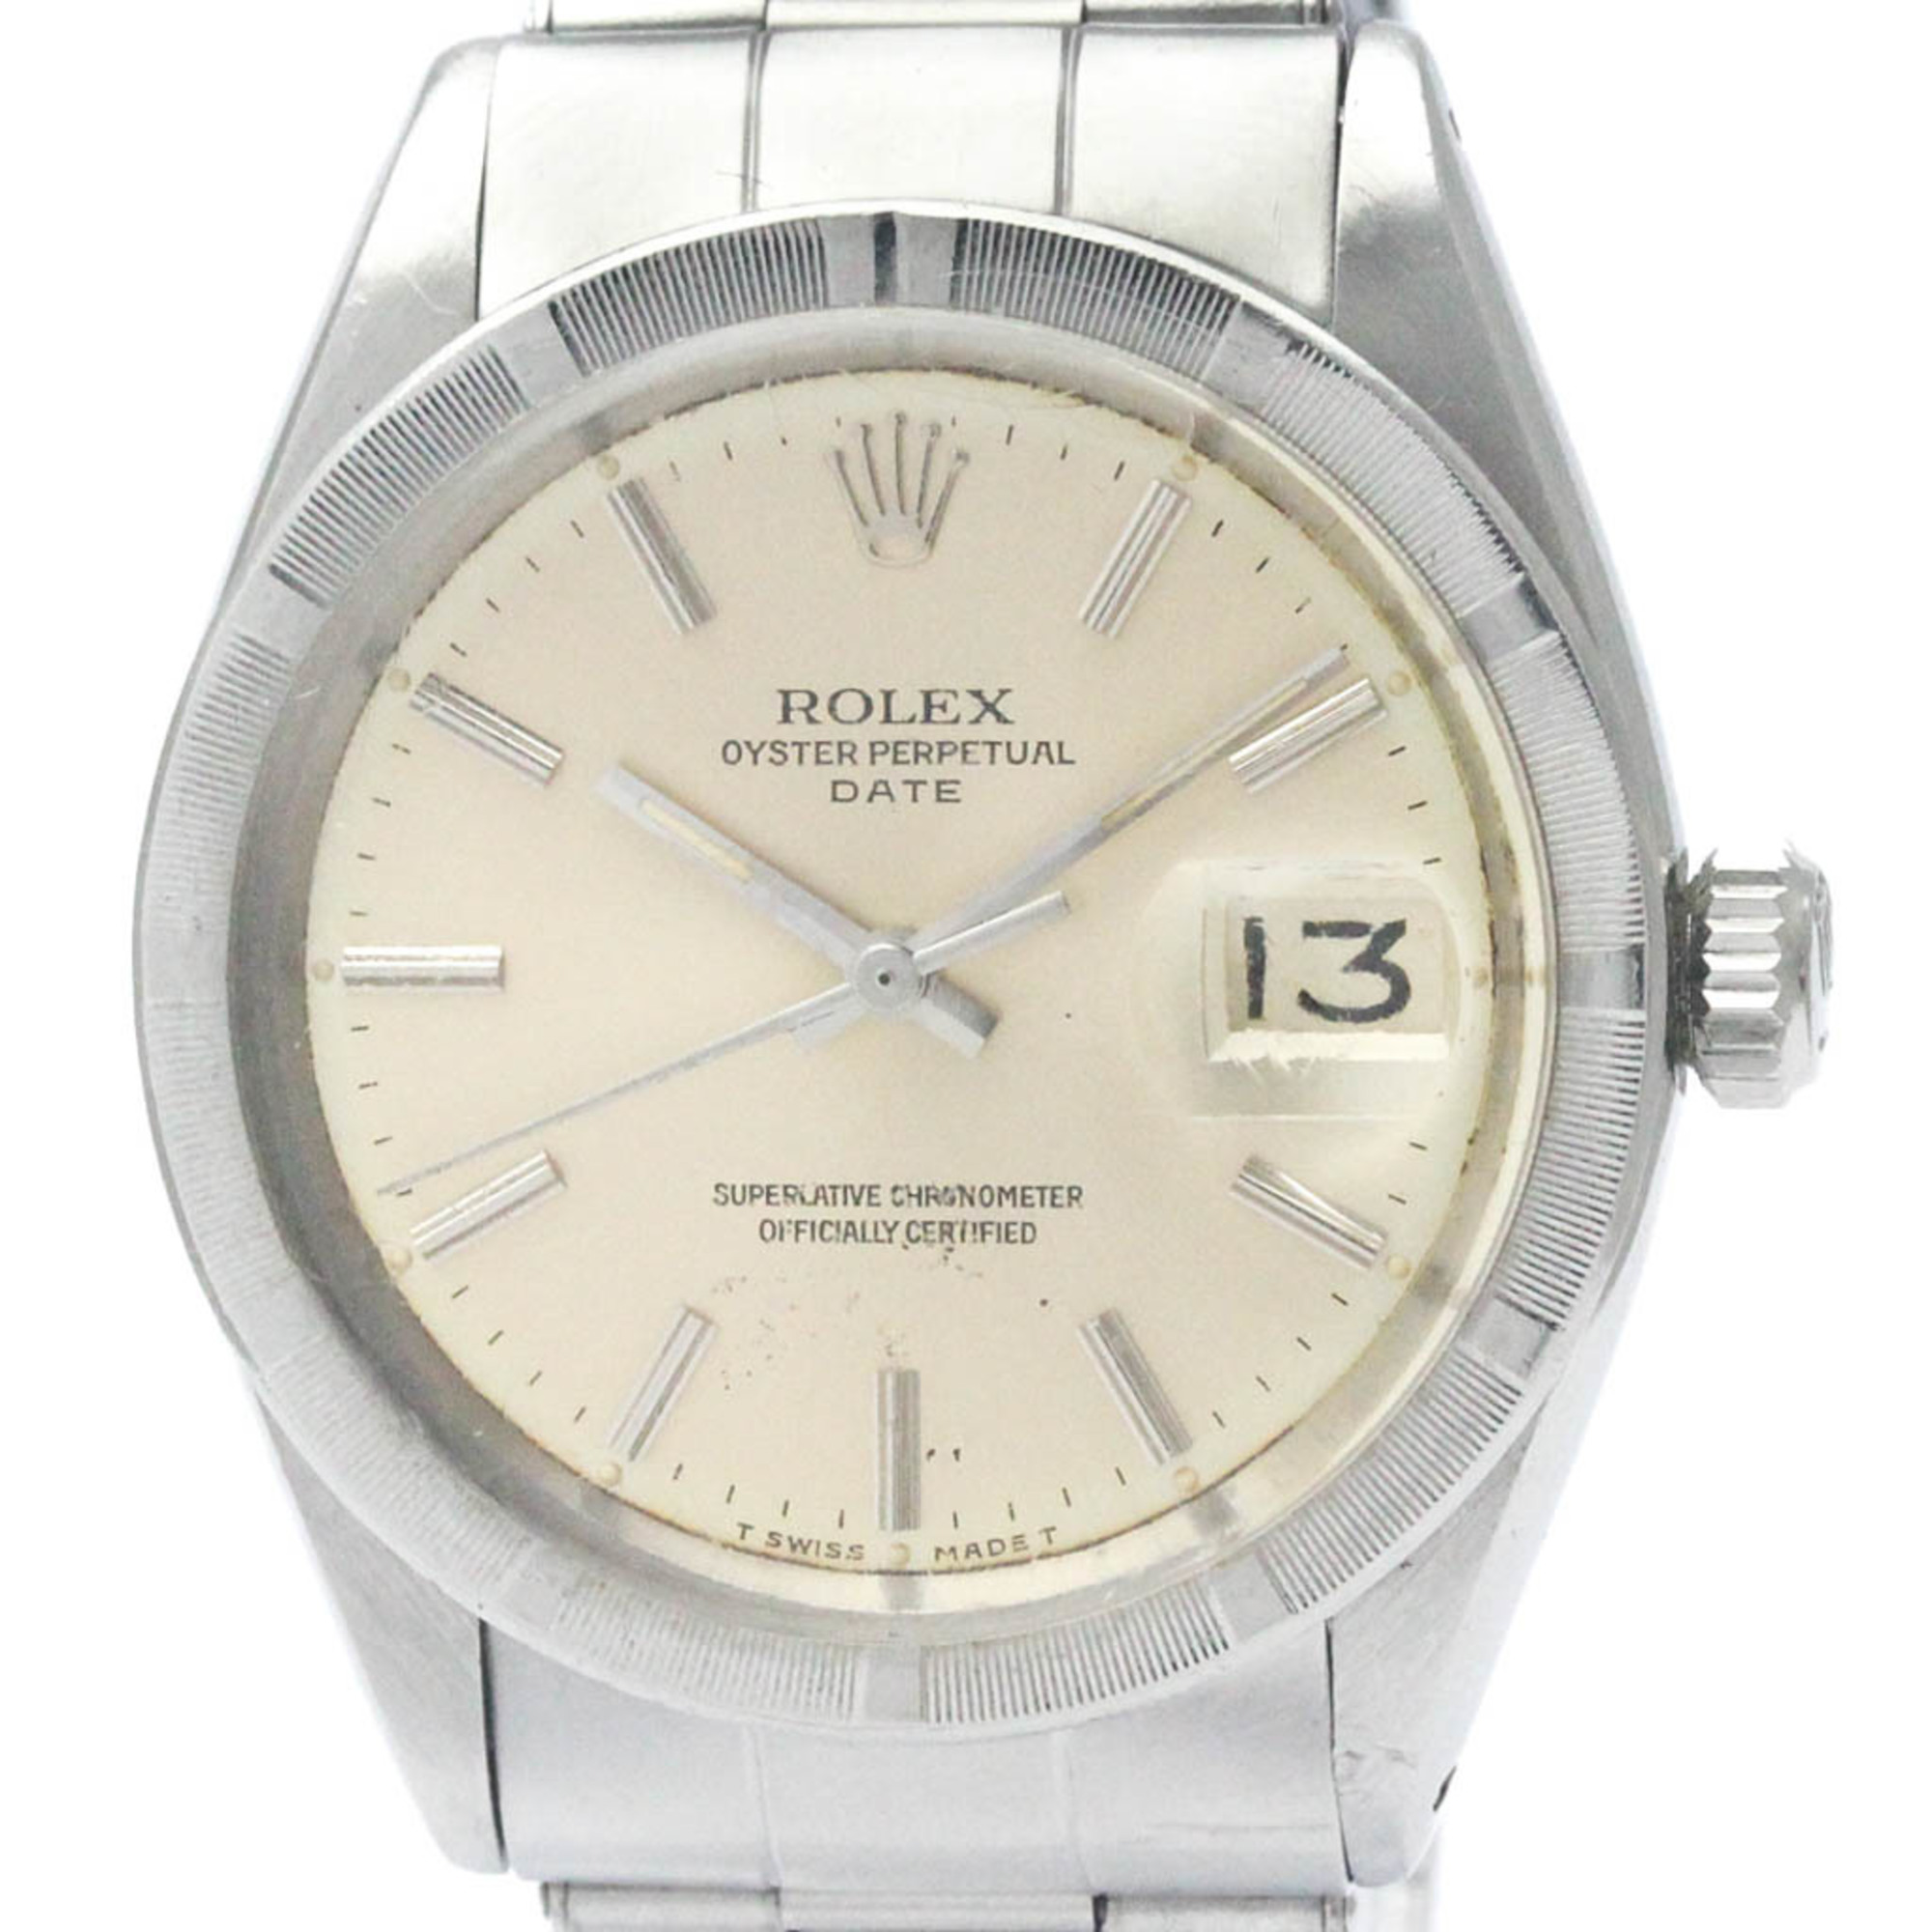 Vintage ROLEX Oyster Perpetual Date 1501 Steel Automatic Mens Watch BF568316